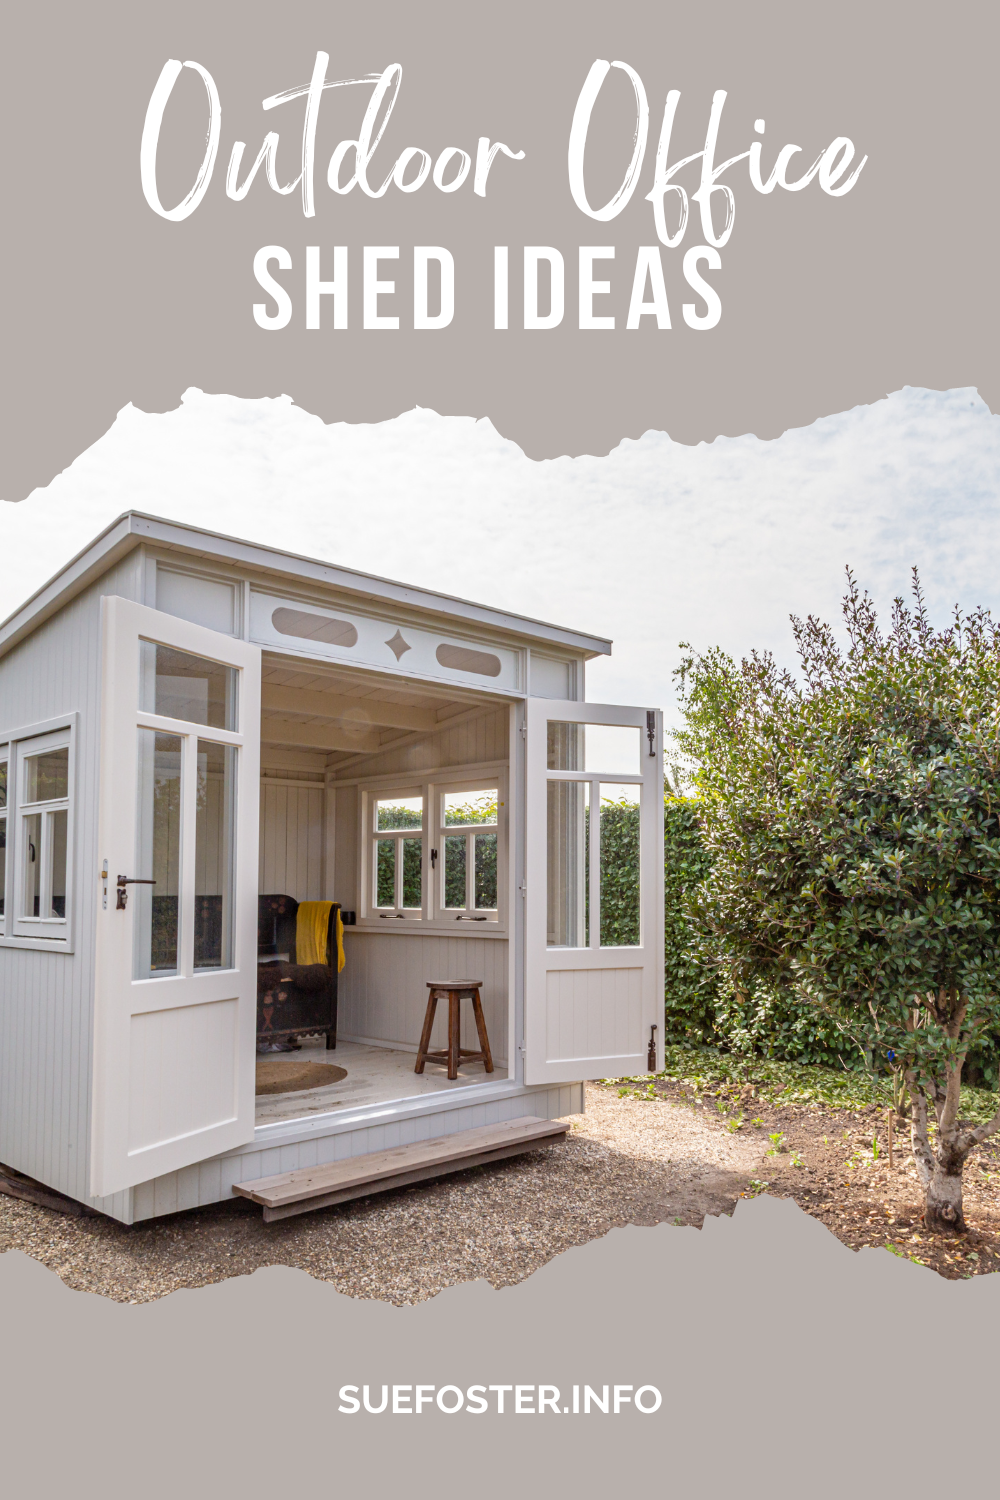 Outdoor office shed ideas for when you work from home and need somewhere quiet to work away from the house.